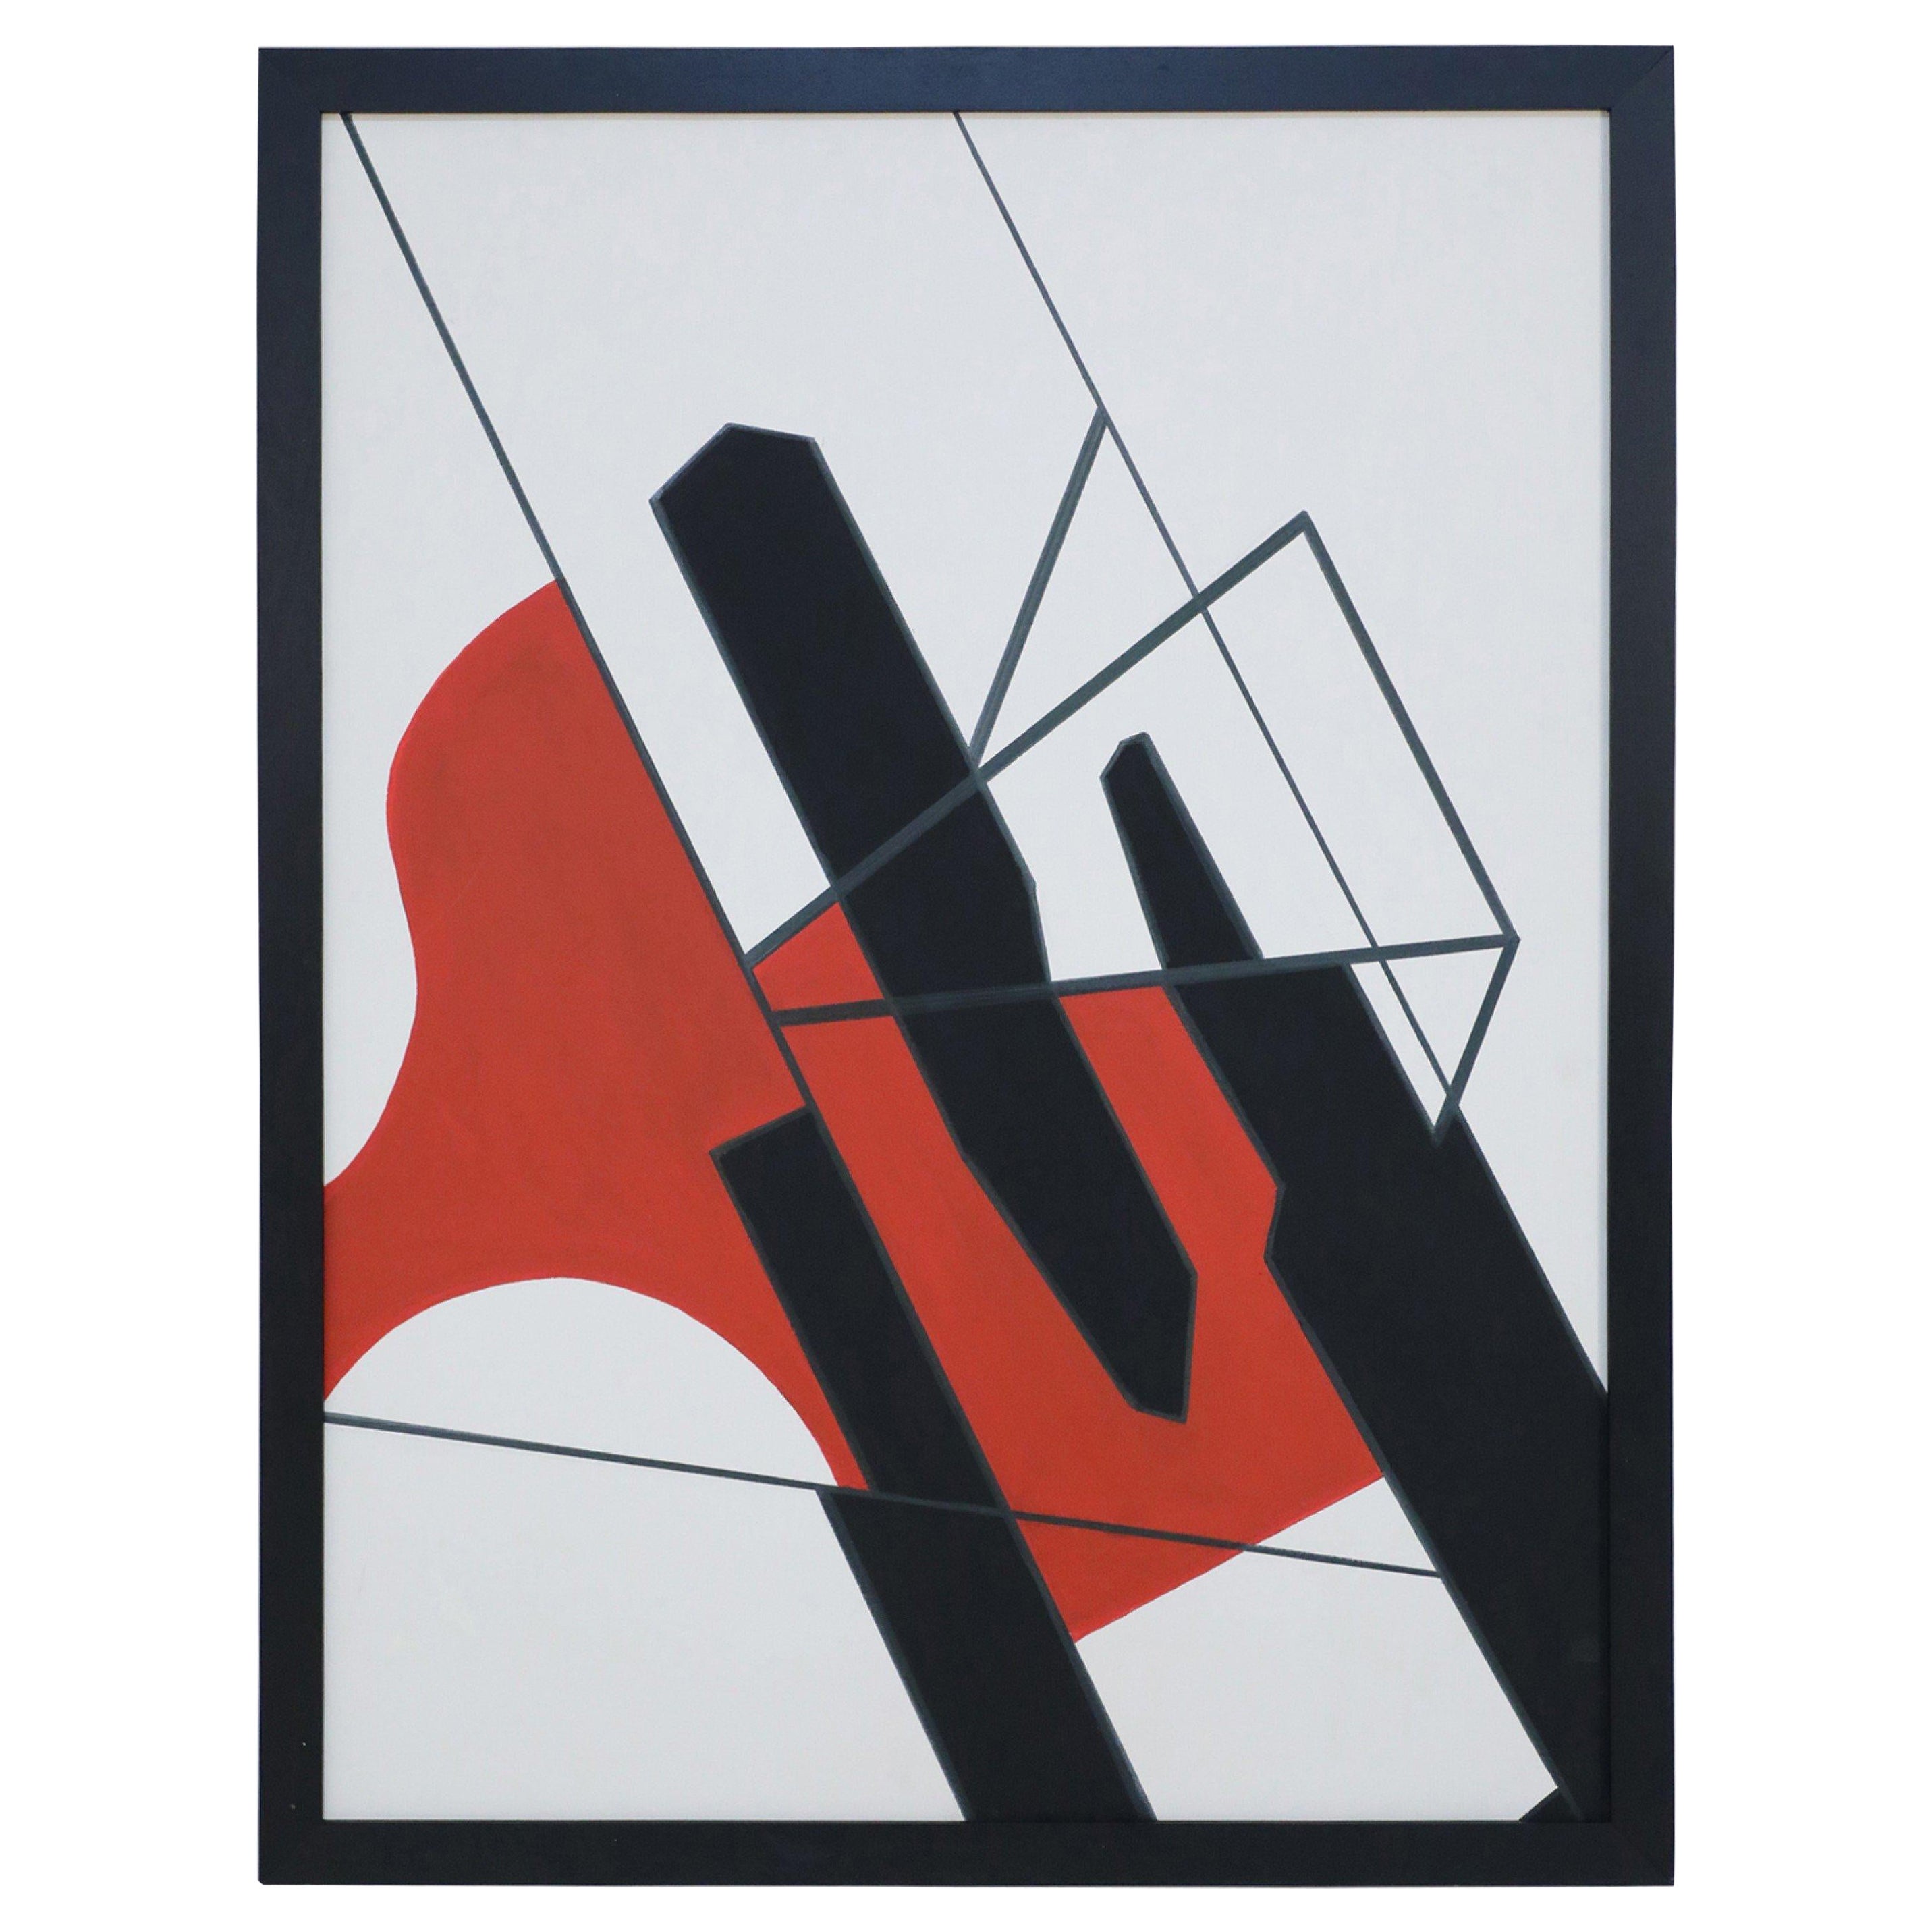 Framed Acrylic Abstract Painting of Geometric Shapes in Black, Red, and White